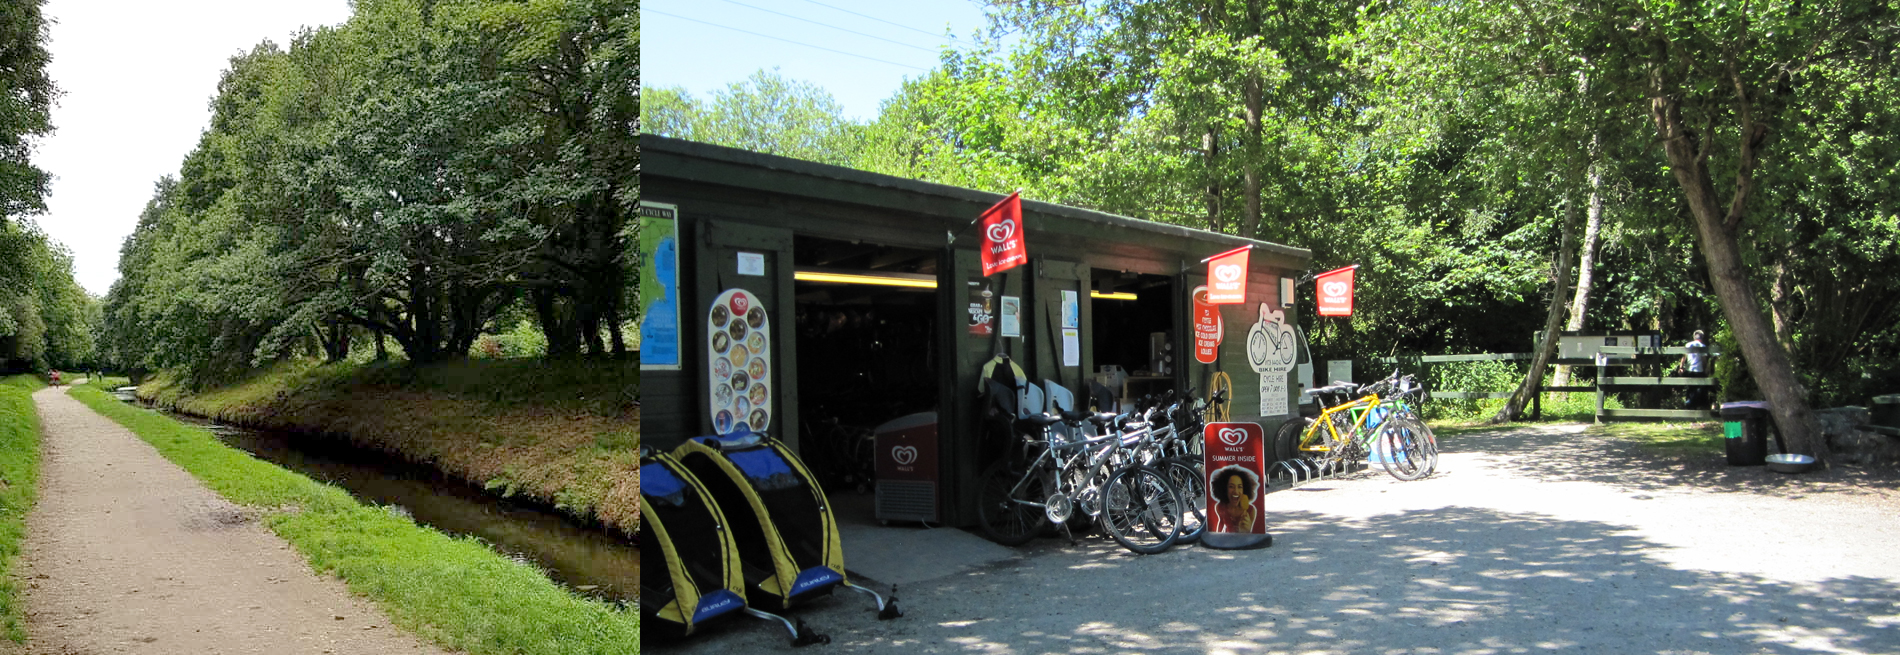 Cycle hire centre in Pentewan, Cornwall